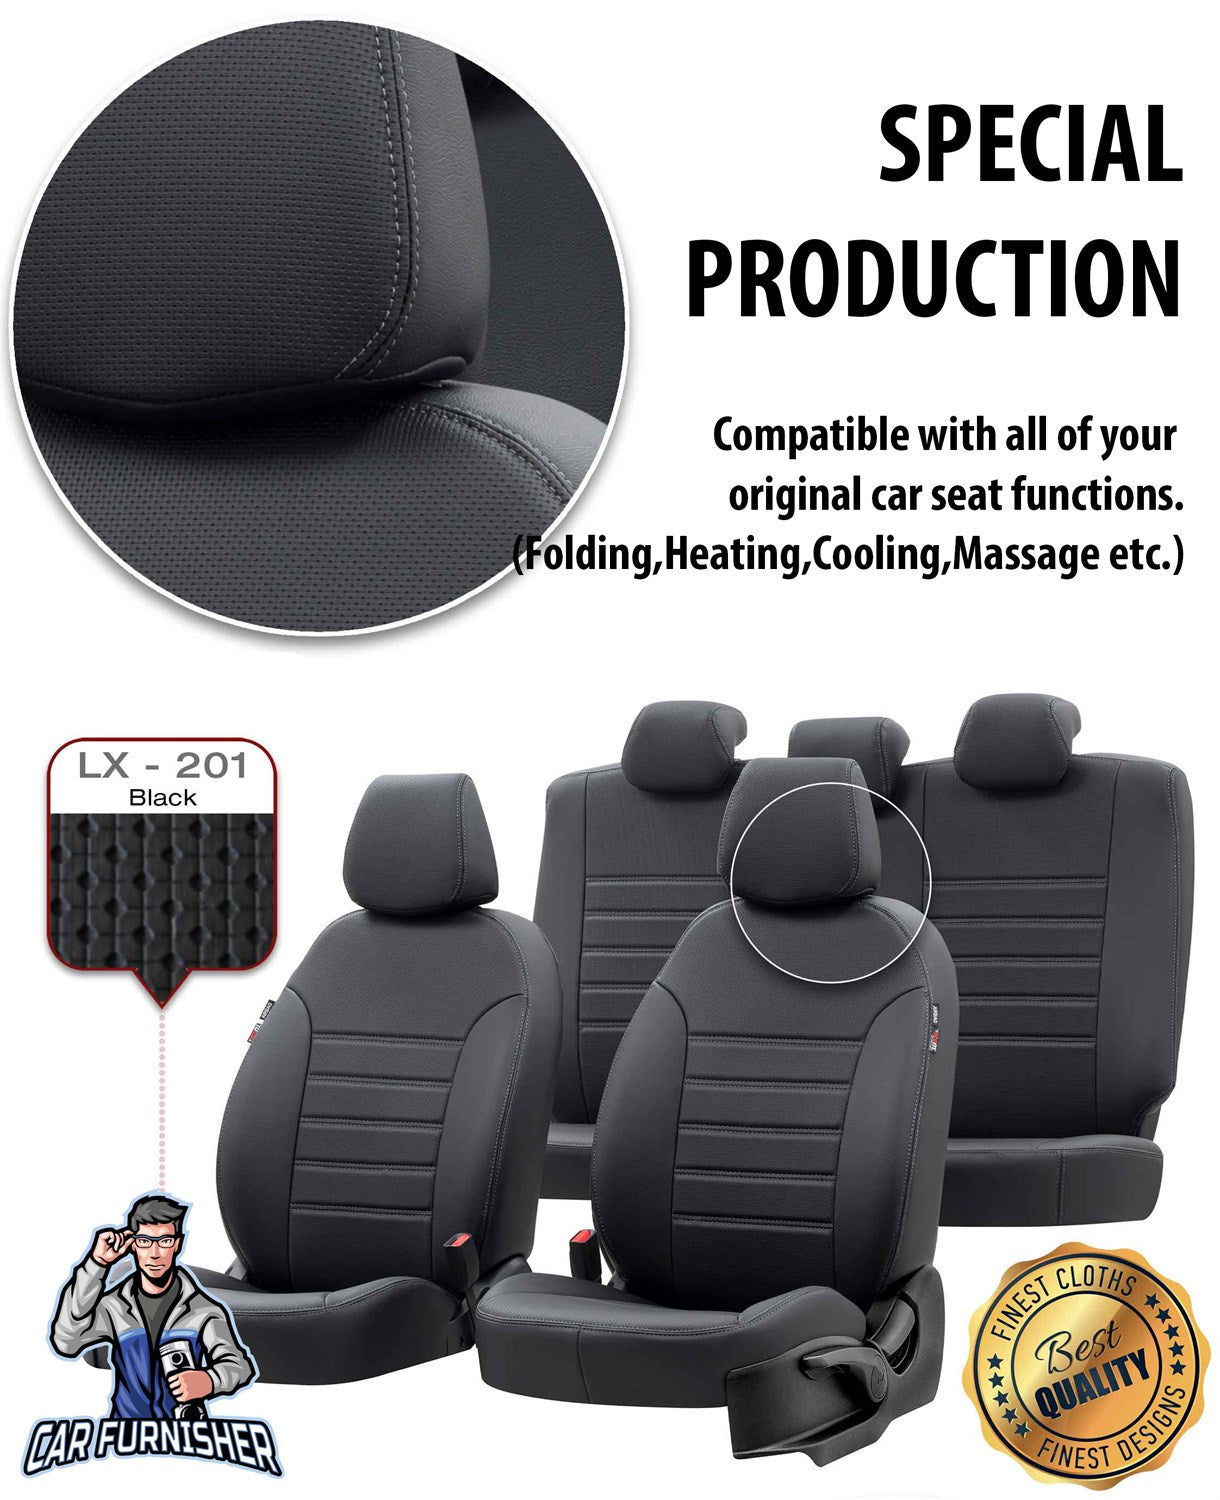 Volkswagen Passat Seat Cover New York Leather Design Smoked Leather